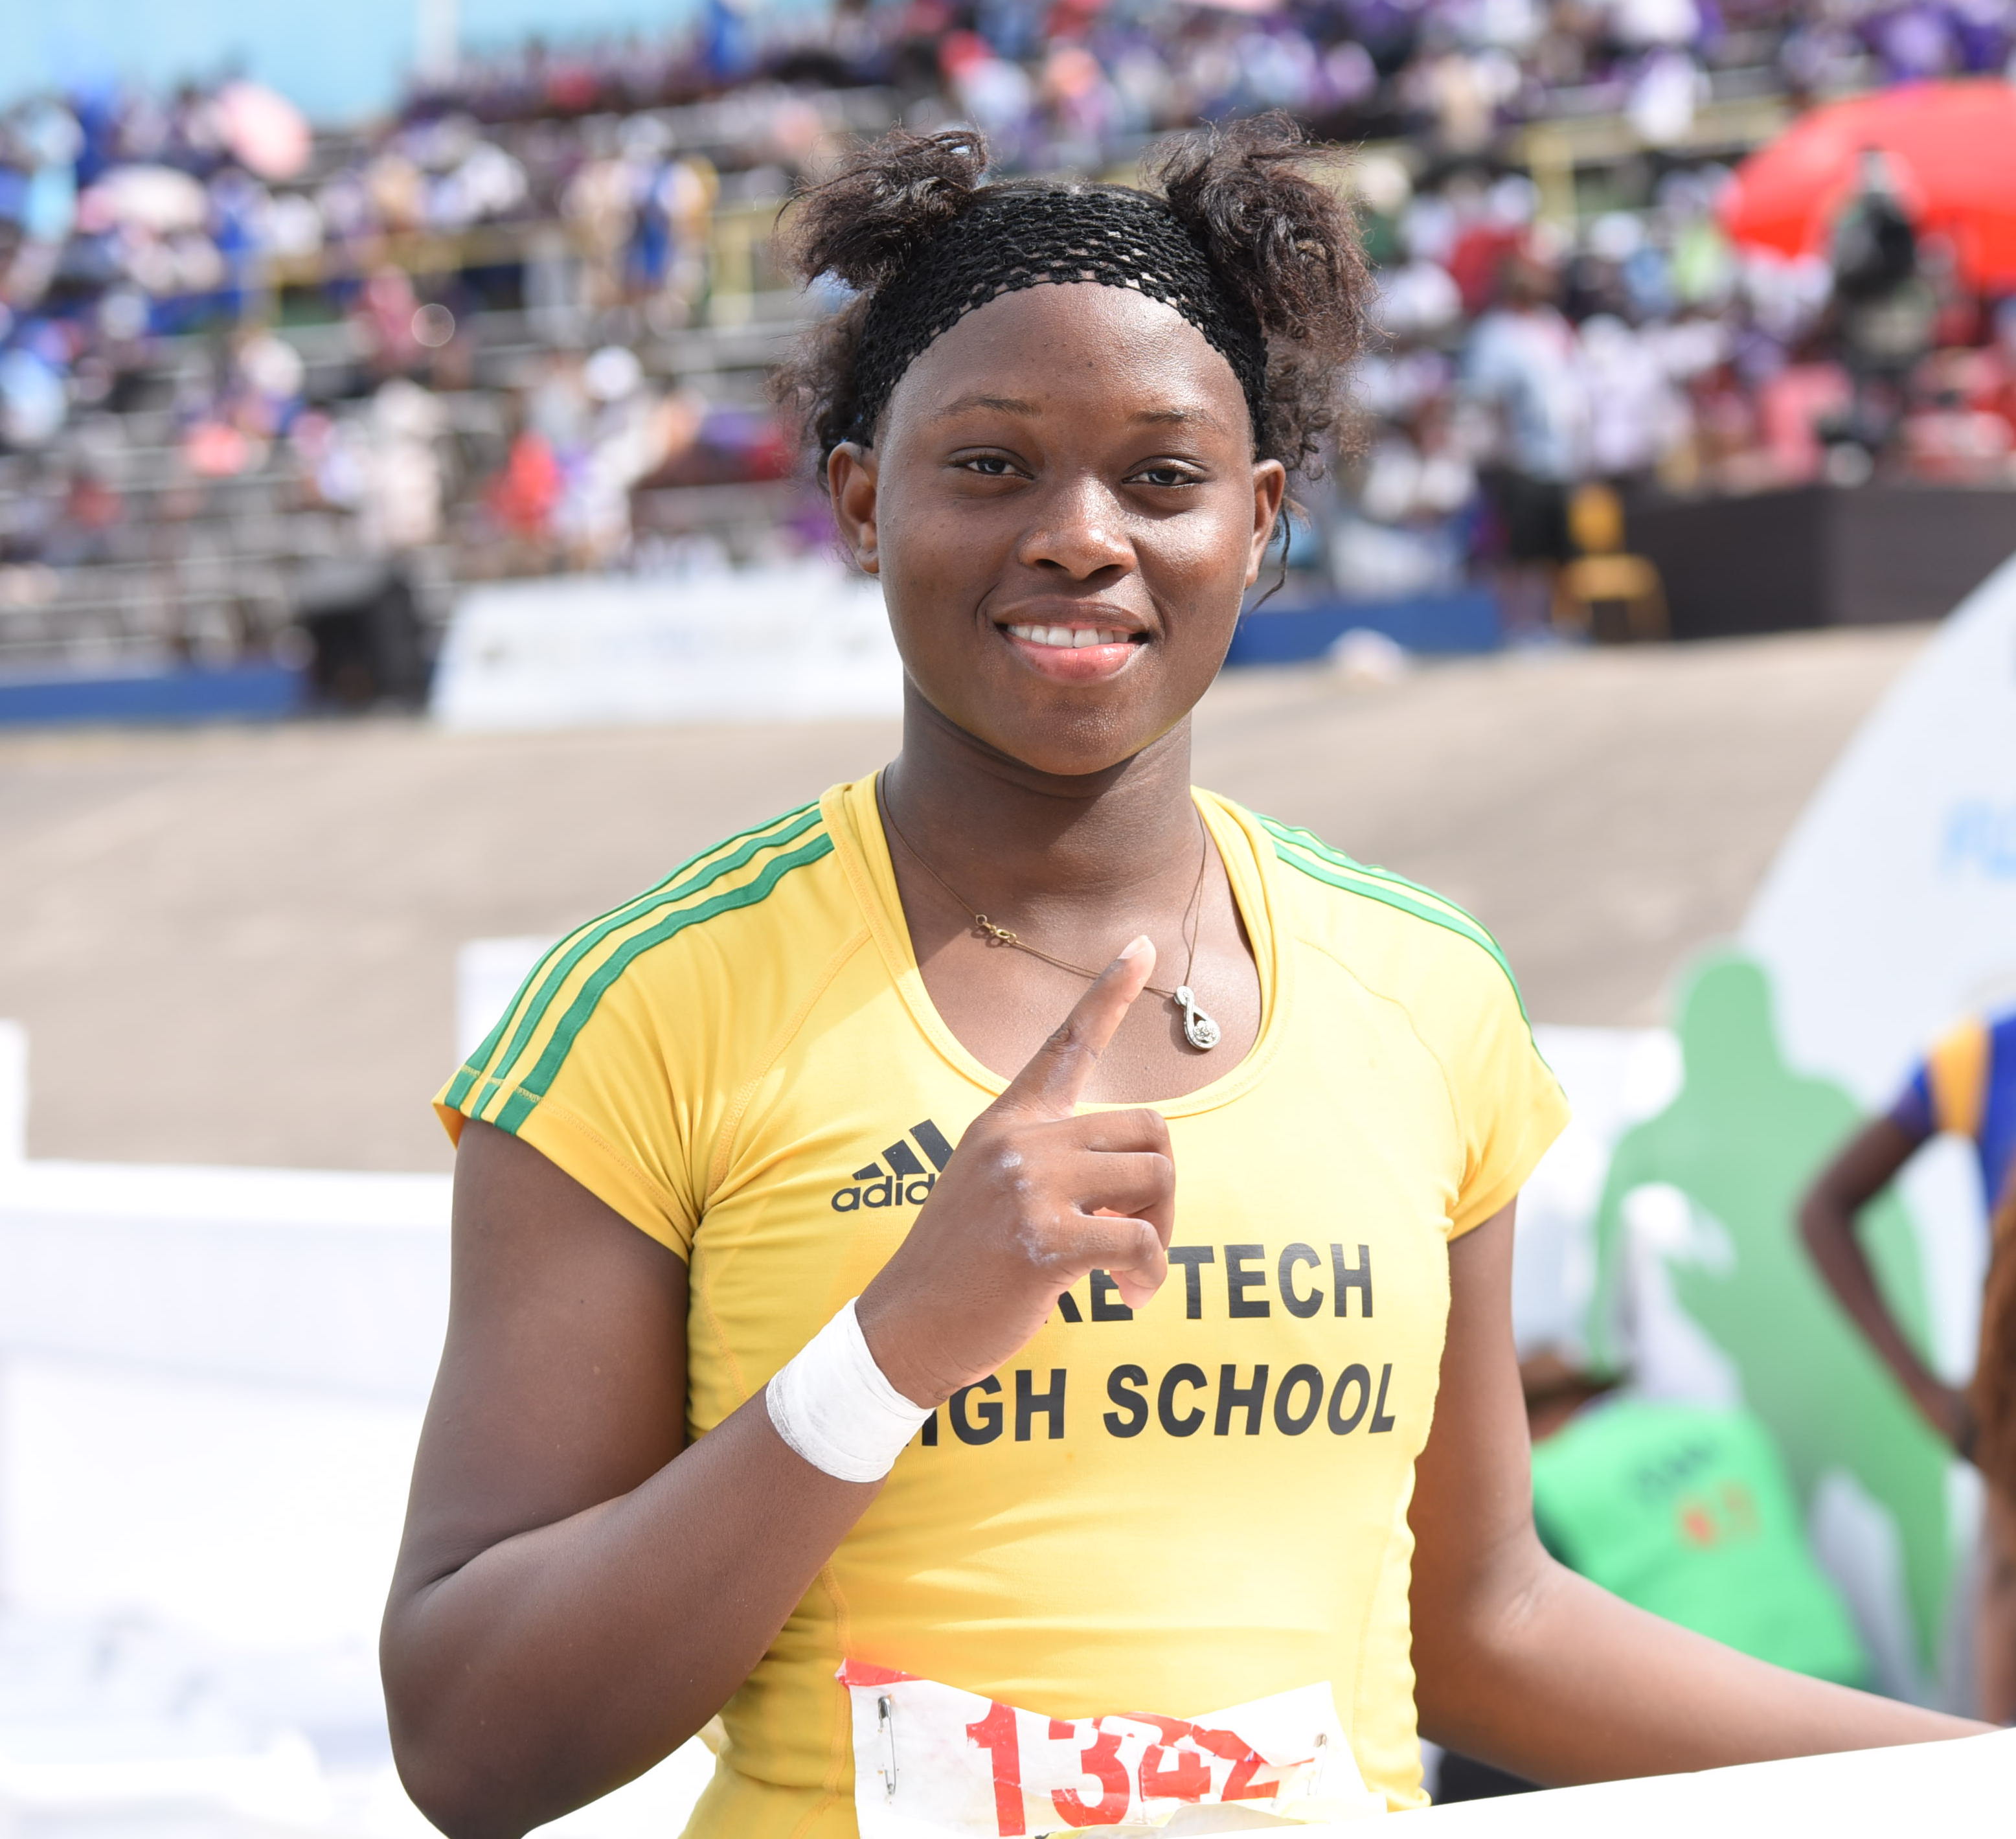 Forbes breaks Class 2 discus record #Champs2018